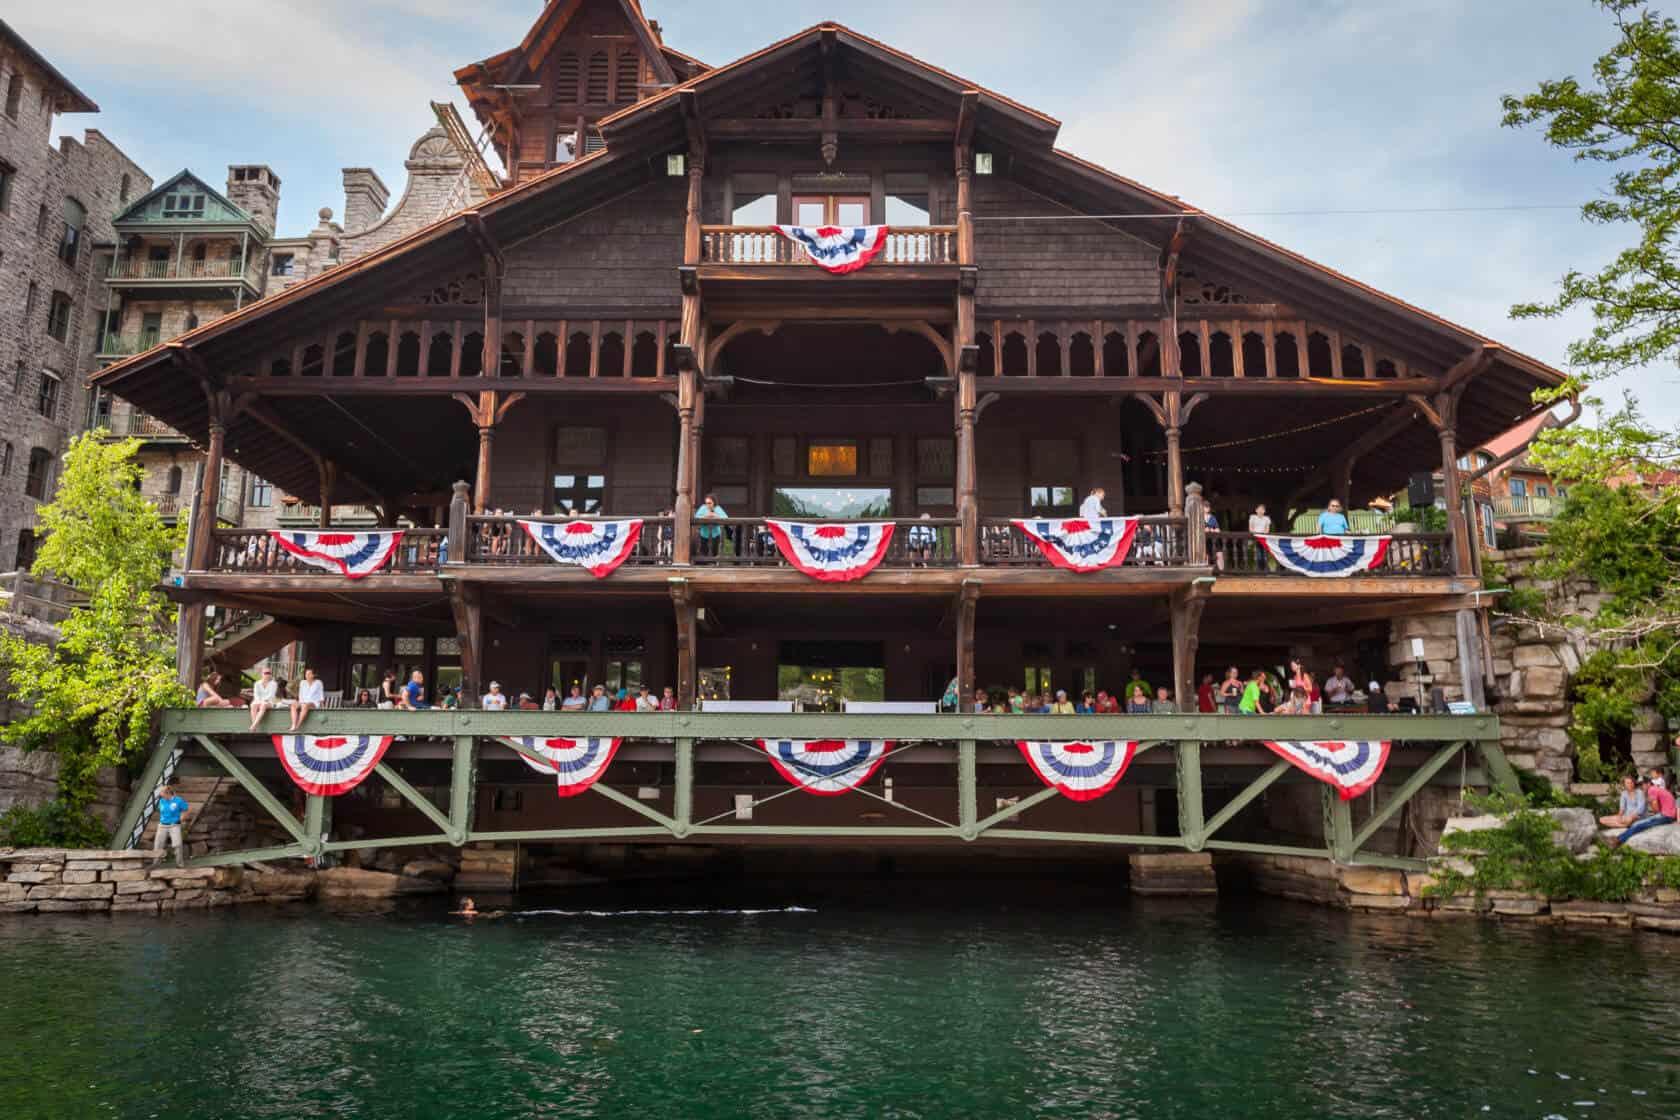 Mohonk Mountain House, 4th of July